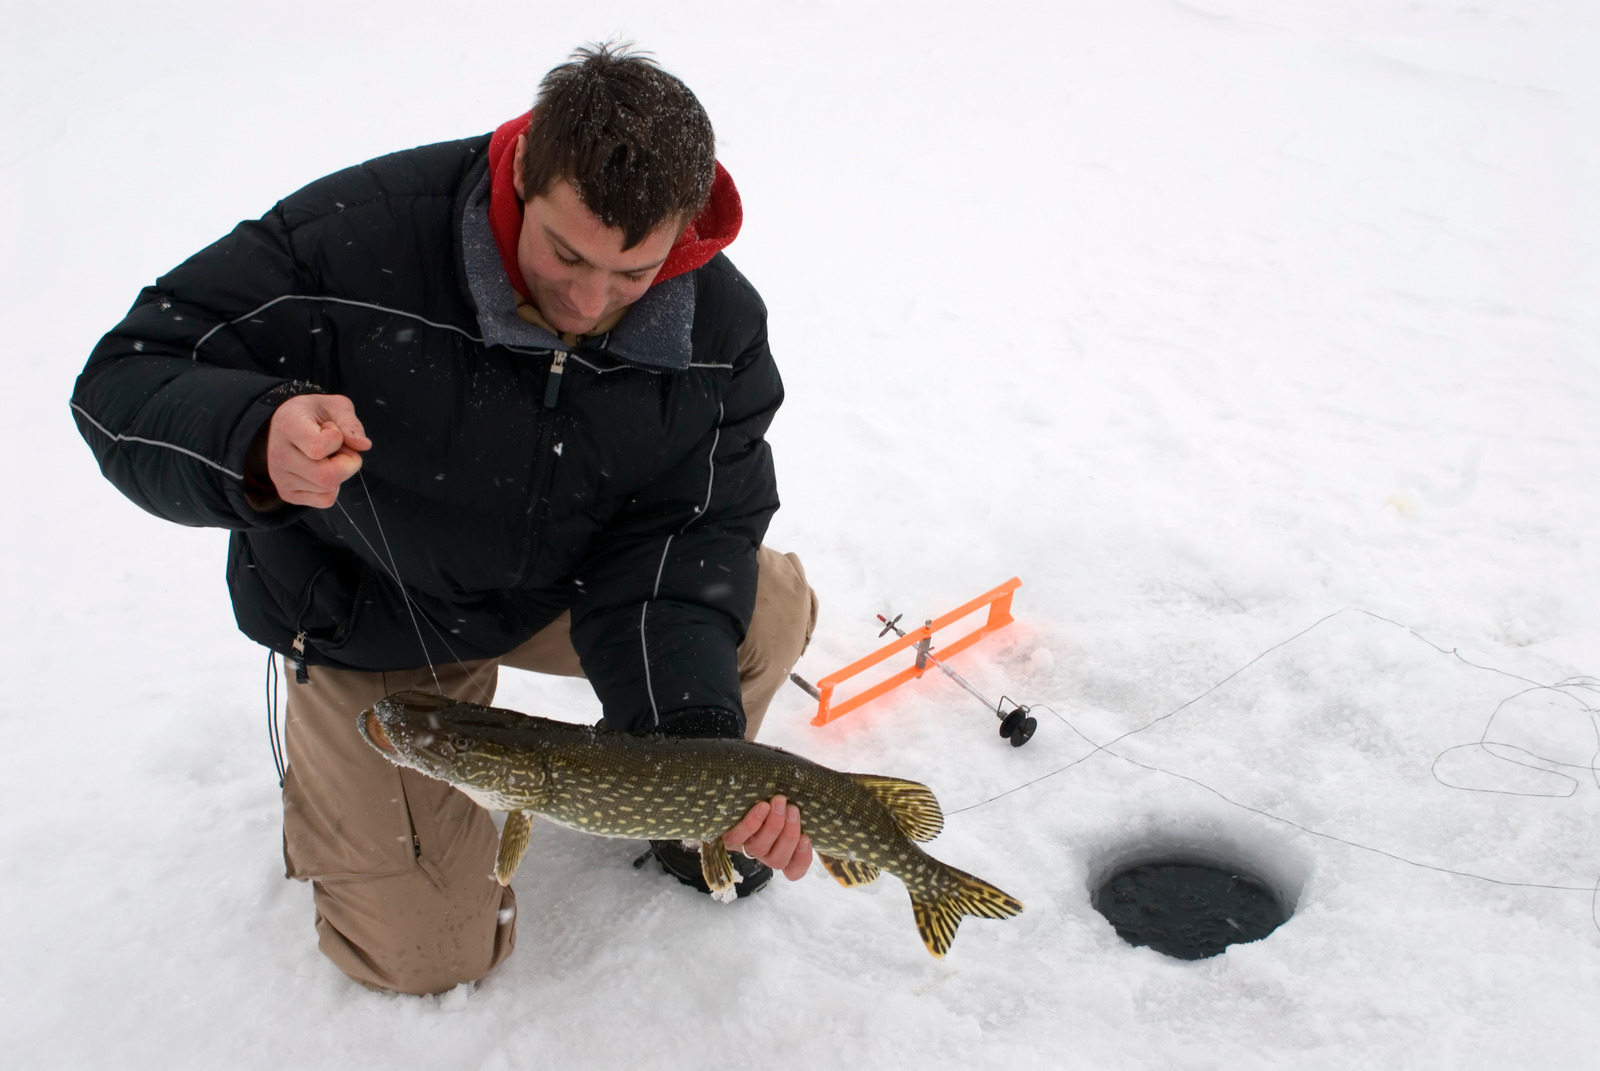 successful northern pike fisherman pulling freshly caught pike up through hole in ice, catching it on a tip-up